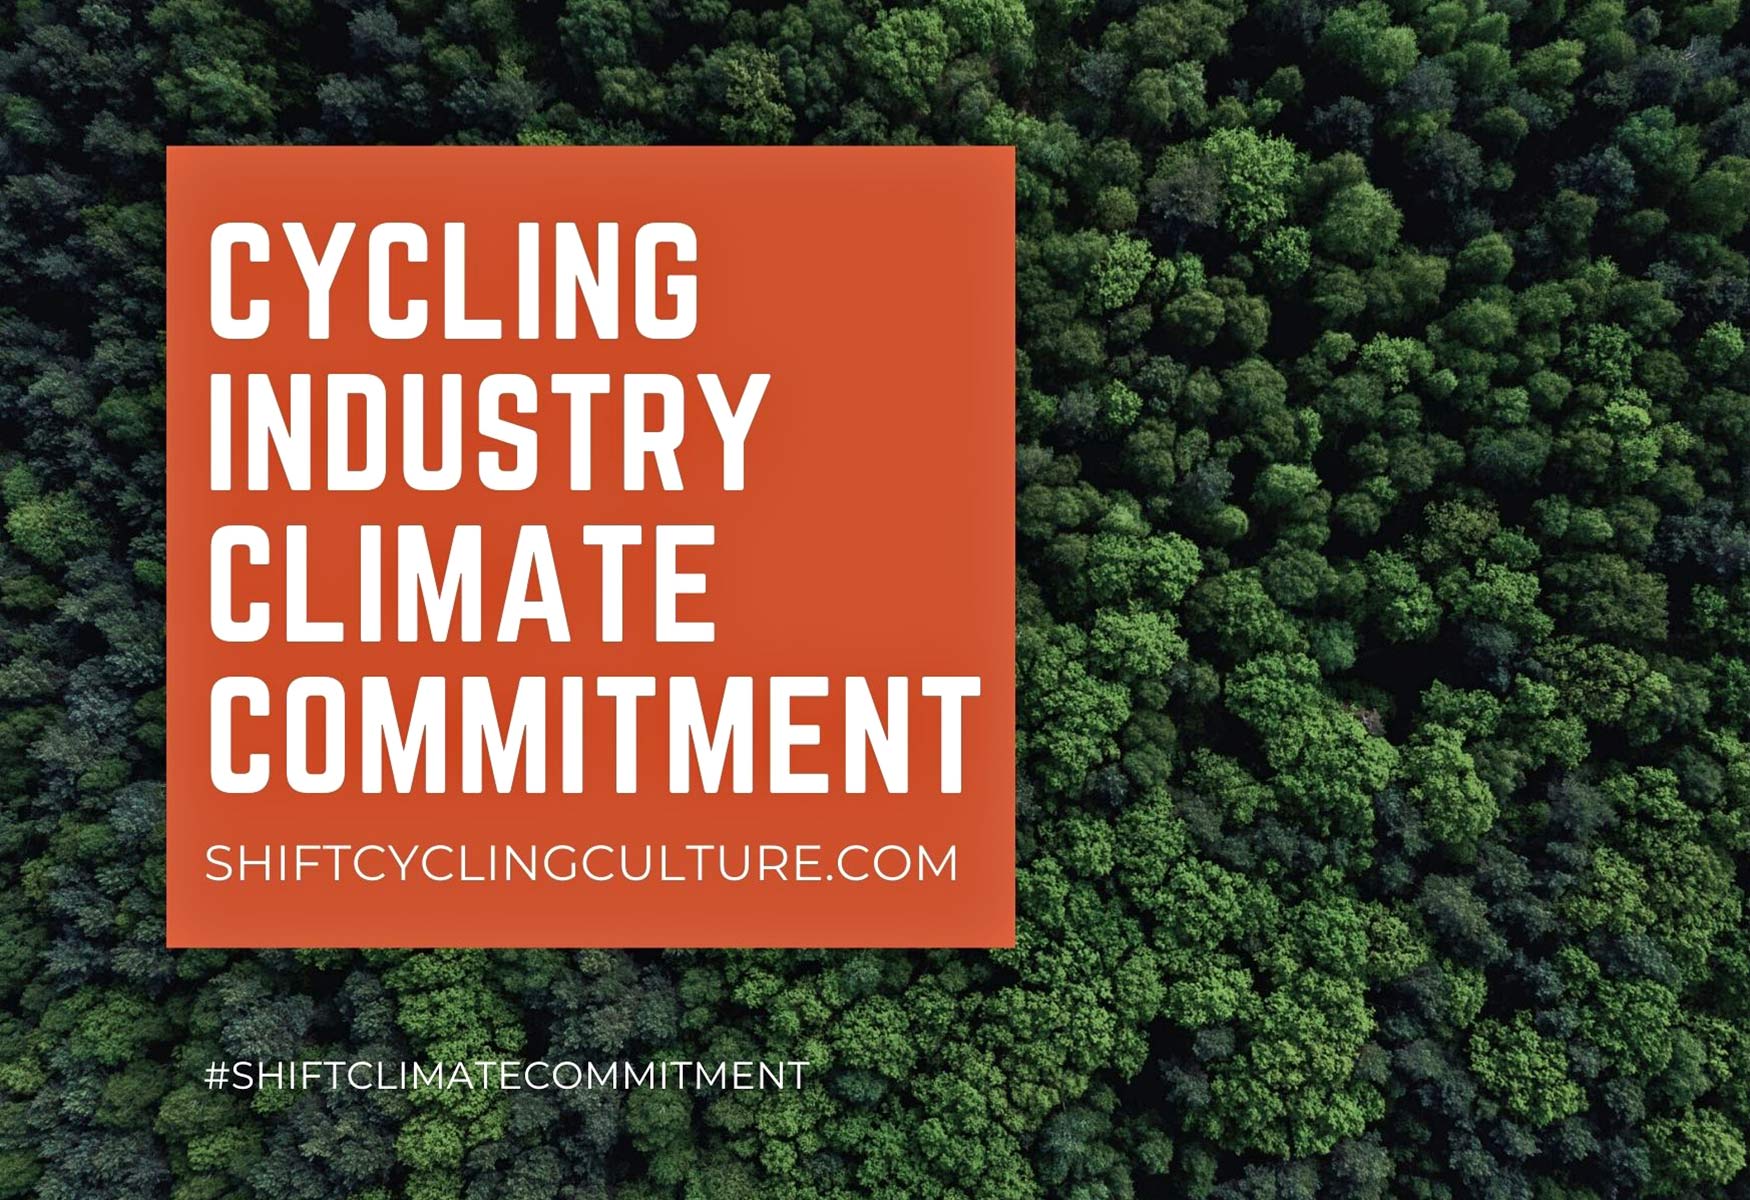 Shift Cycling Culture with an industry-wide Climate Commitment